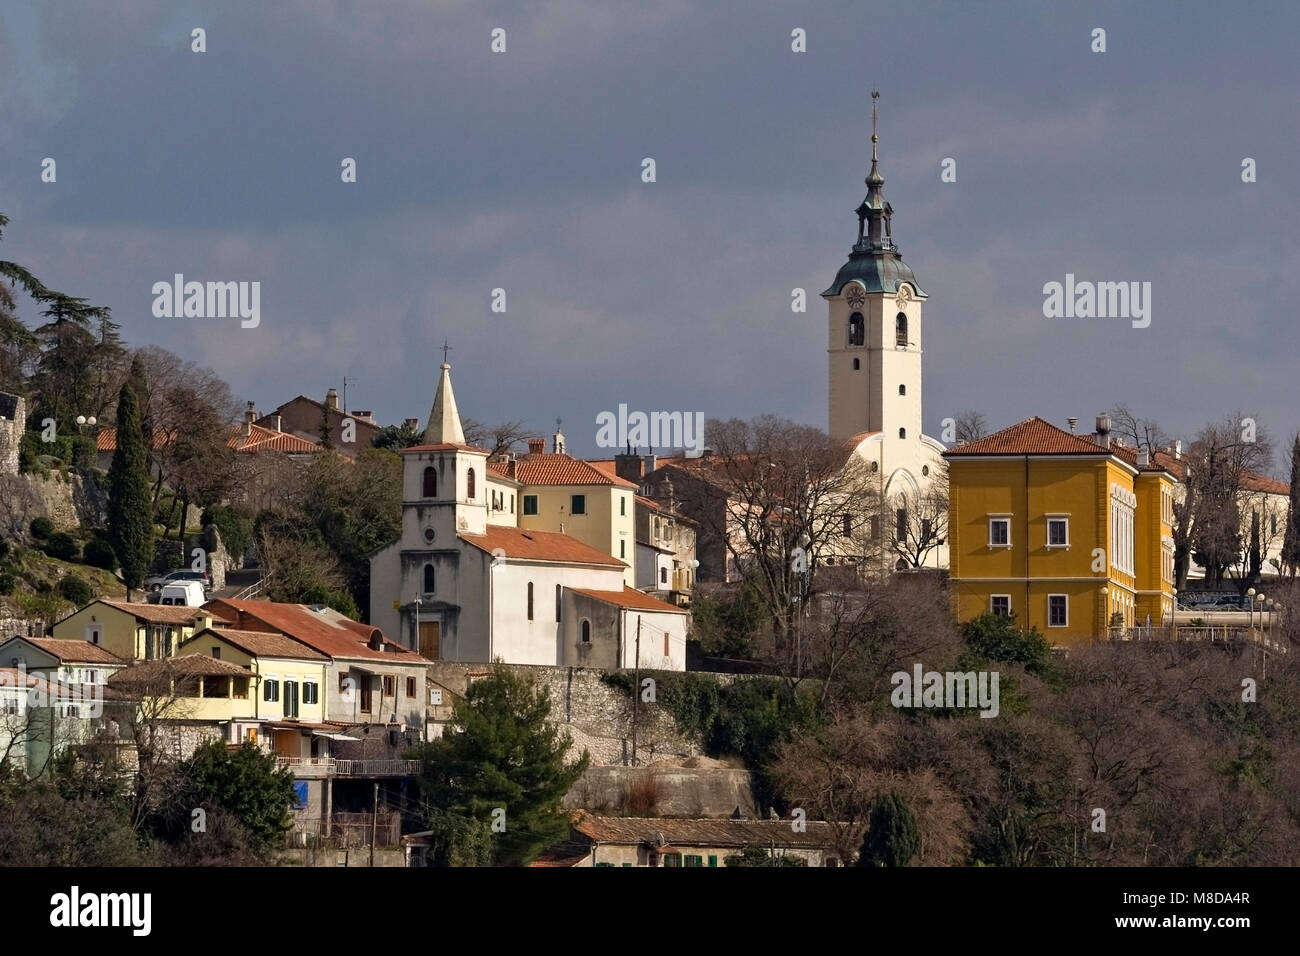 Church of Our Lady of Trsat and church of St George, town Rijeka, Croatia Stock Photo